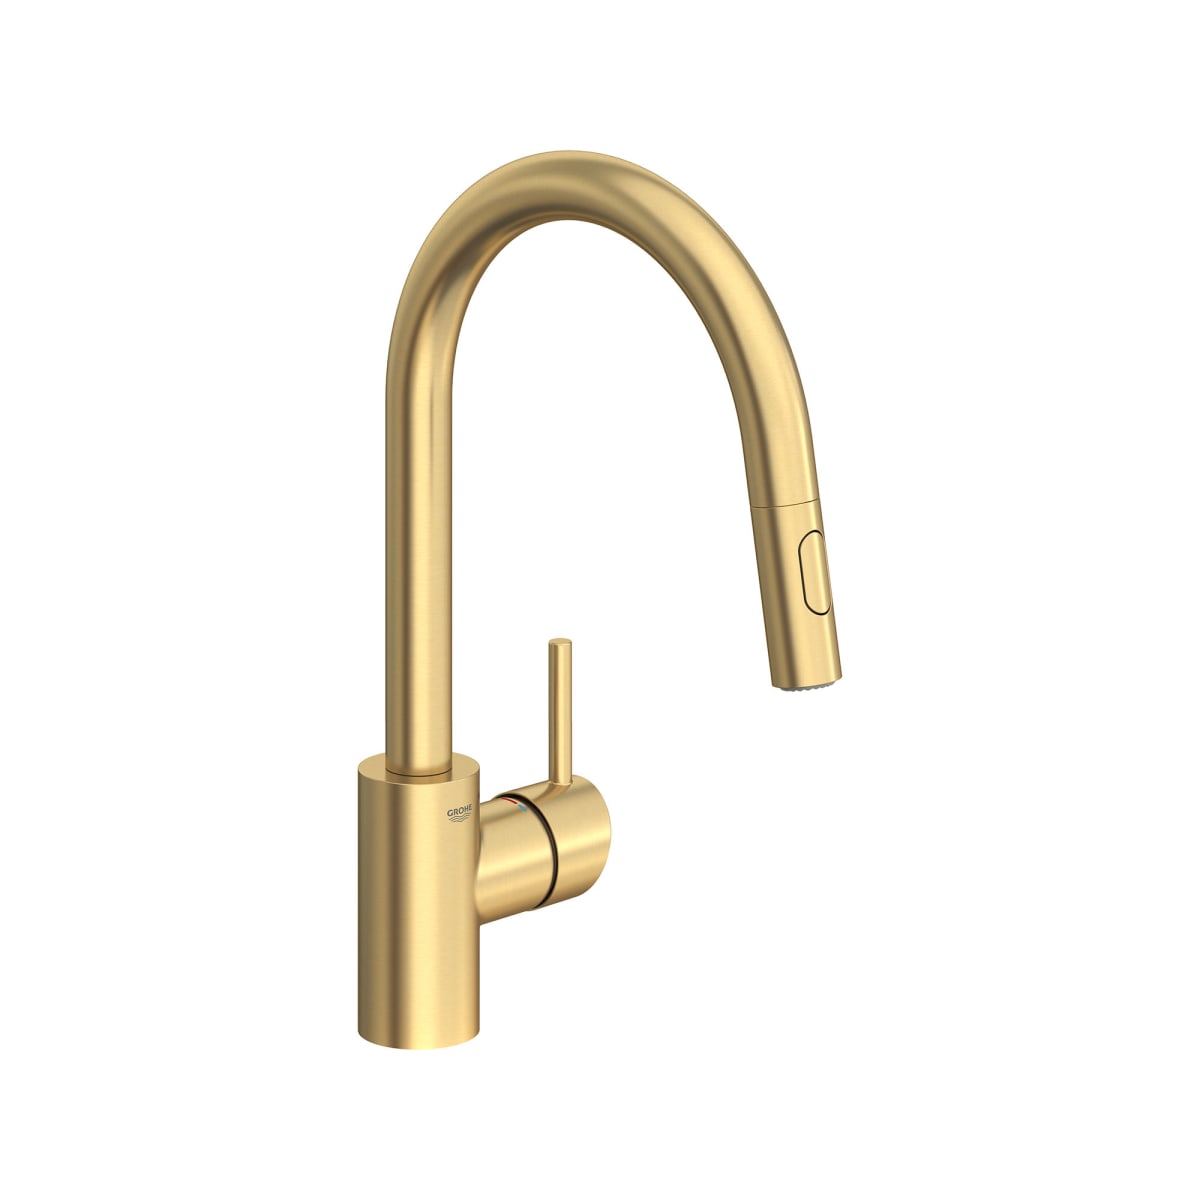 Grohe 32665gn3 Concetto 1 75 Gpm Single